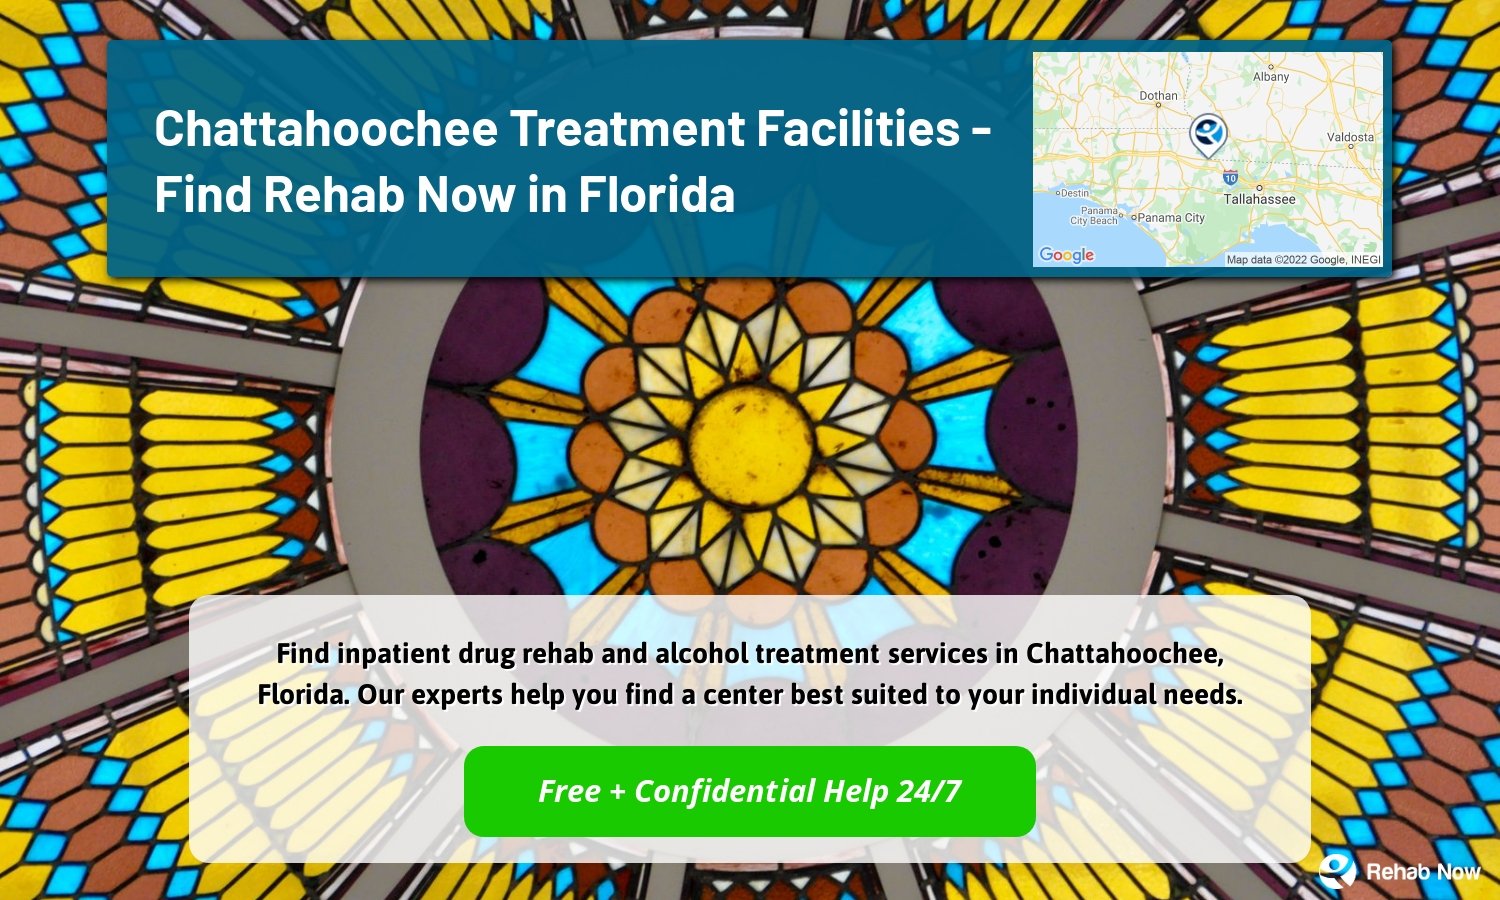 Find inpatient drug rehab and alcohol treatment services in Chattahoochee, Florida. Our experts help you find a center best suited to your individual needs.